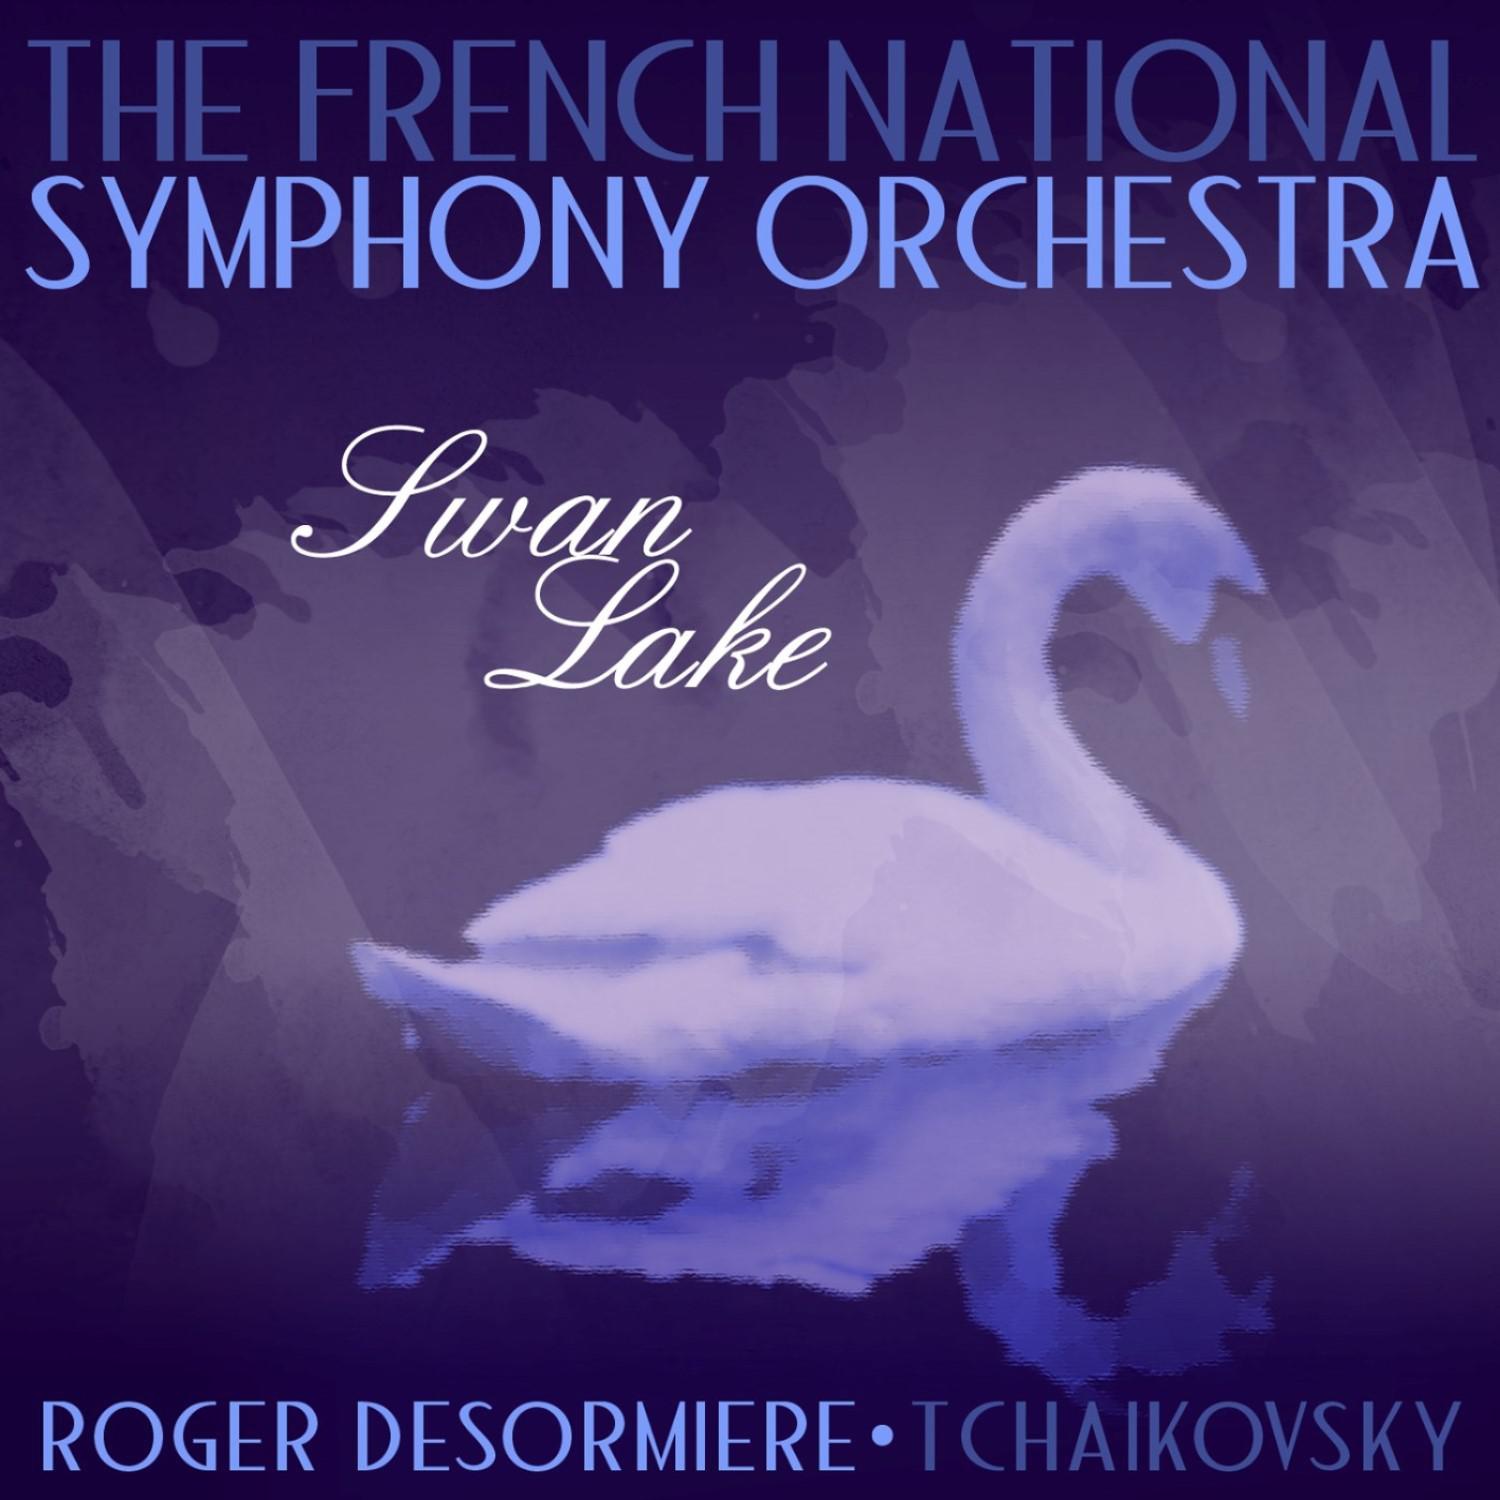 The French National Symphony Orchestra - Swan Lake, Op. 20a, Act IV: Dance Of The Little Swans